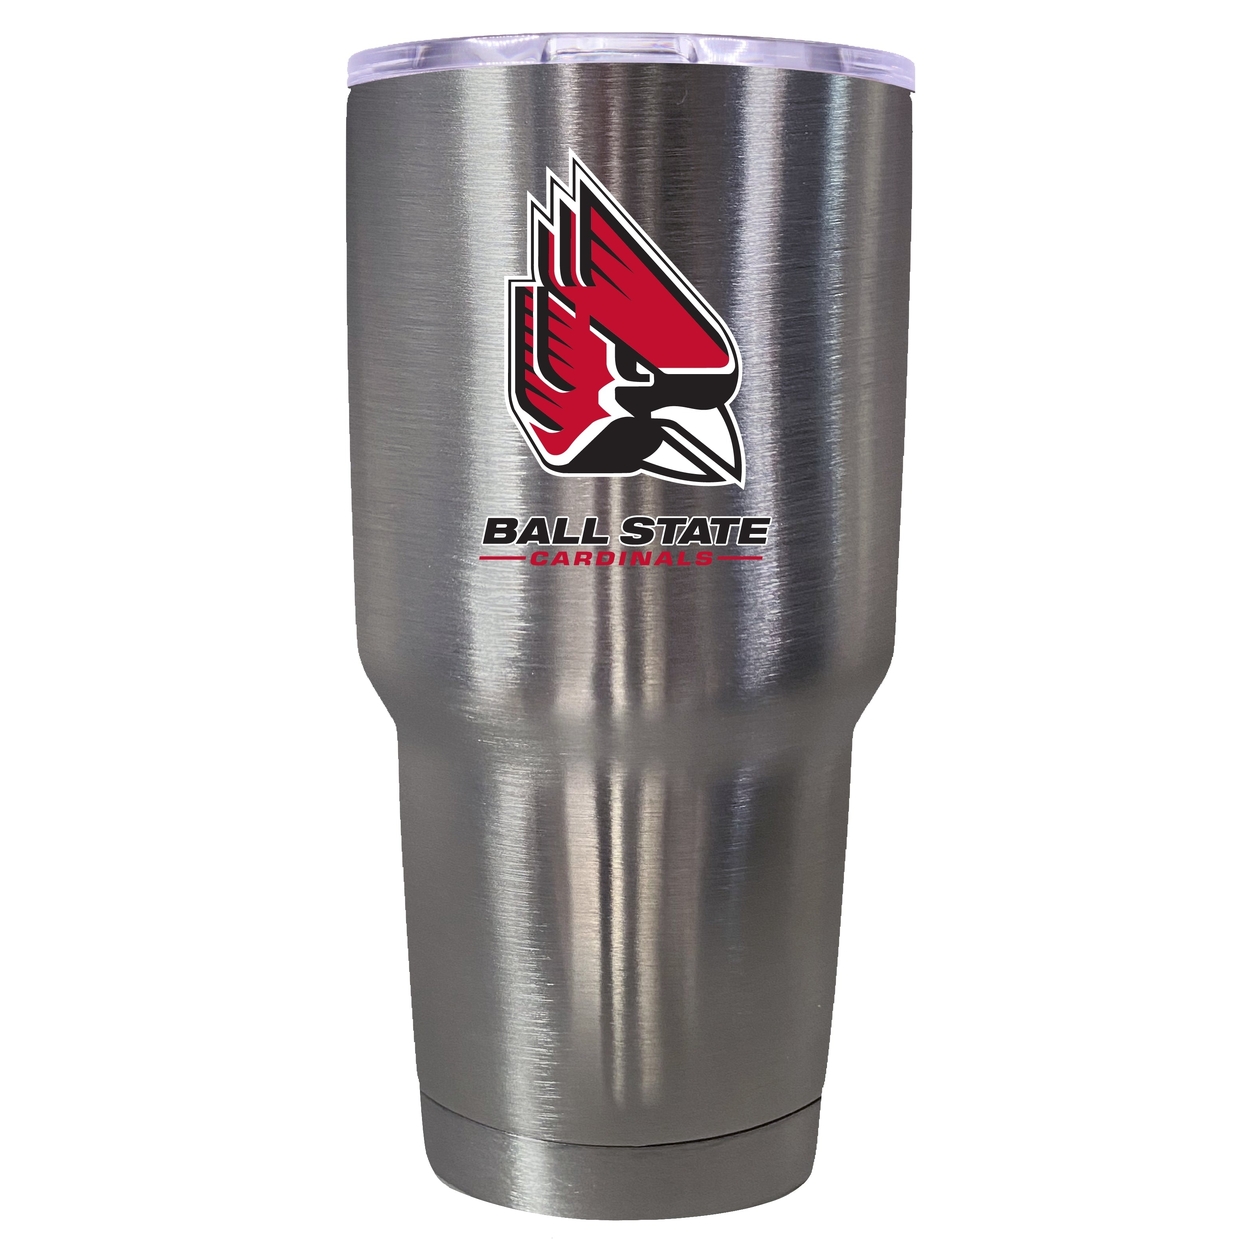 Ball State University 24 Oz Insulated Stainless Steel Tumbler